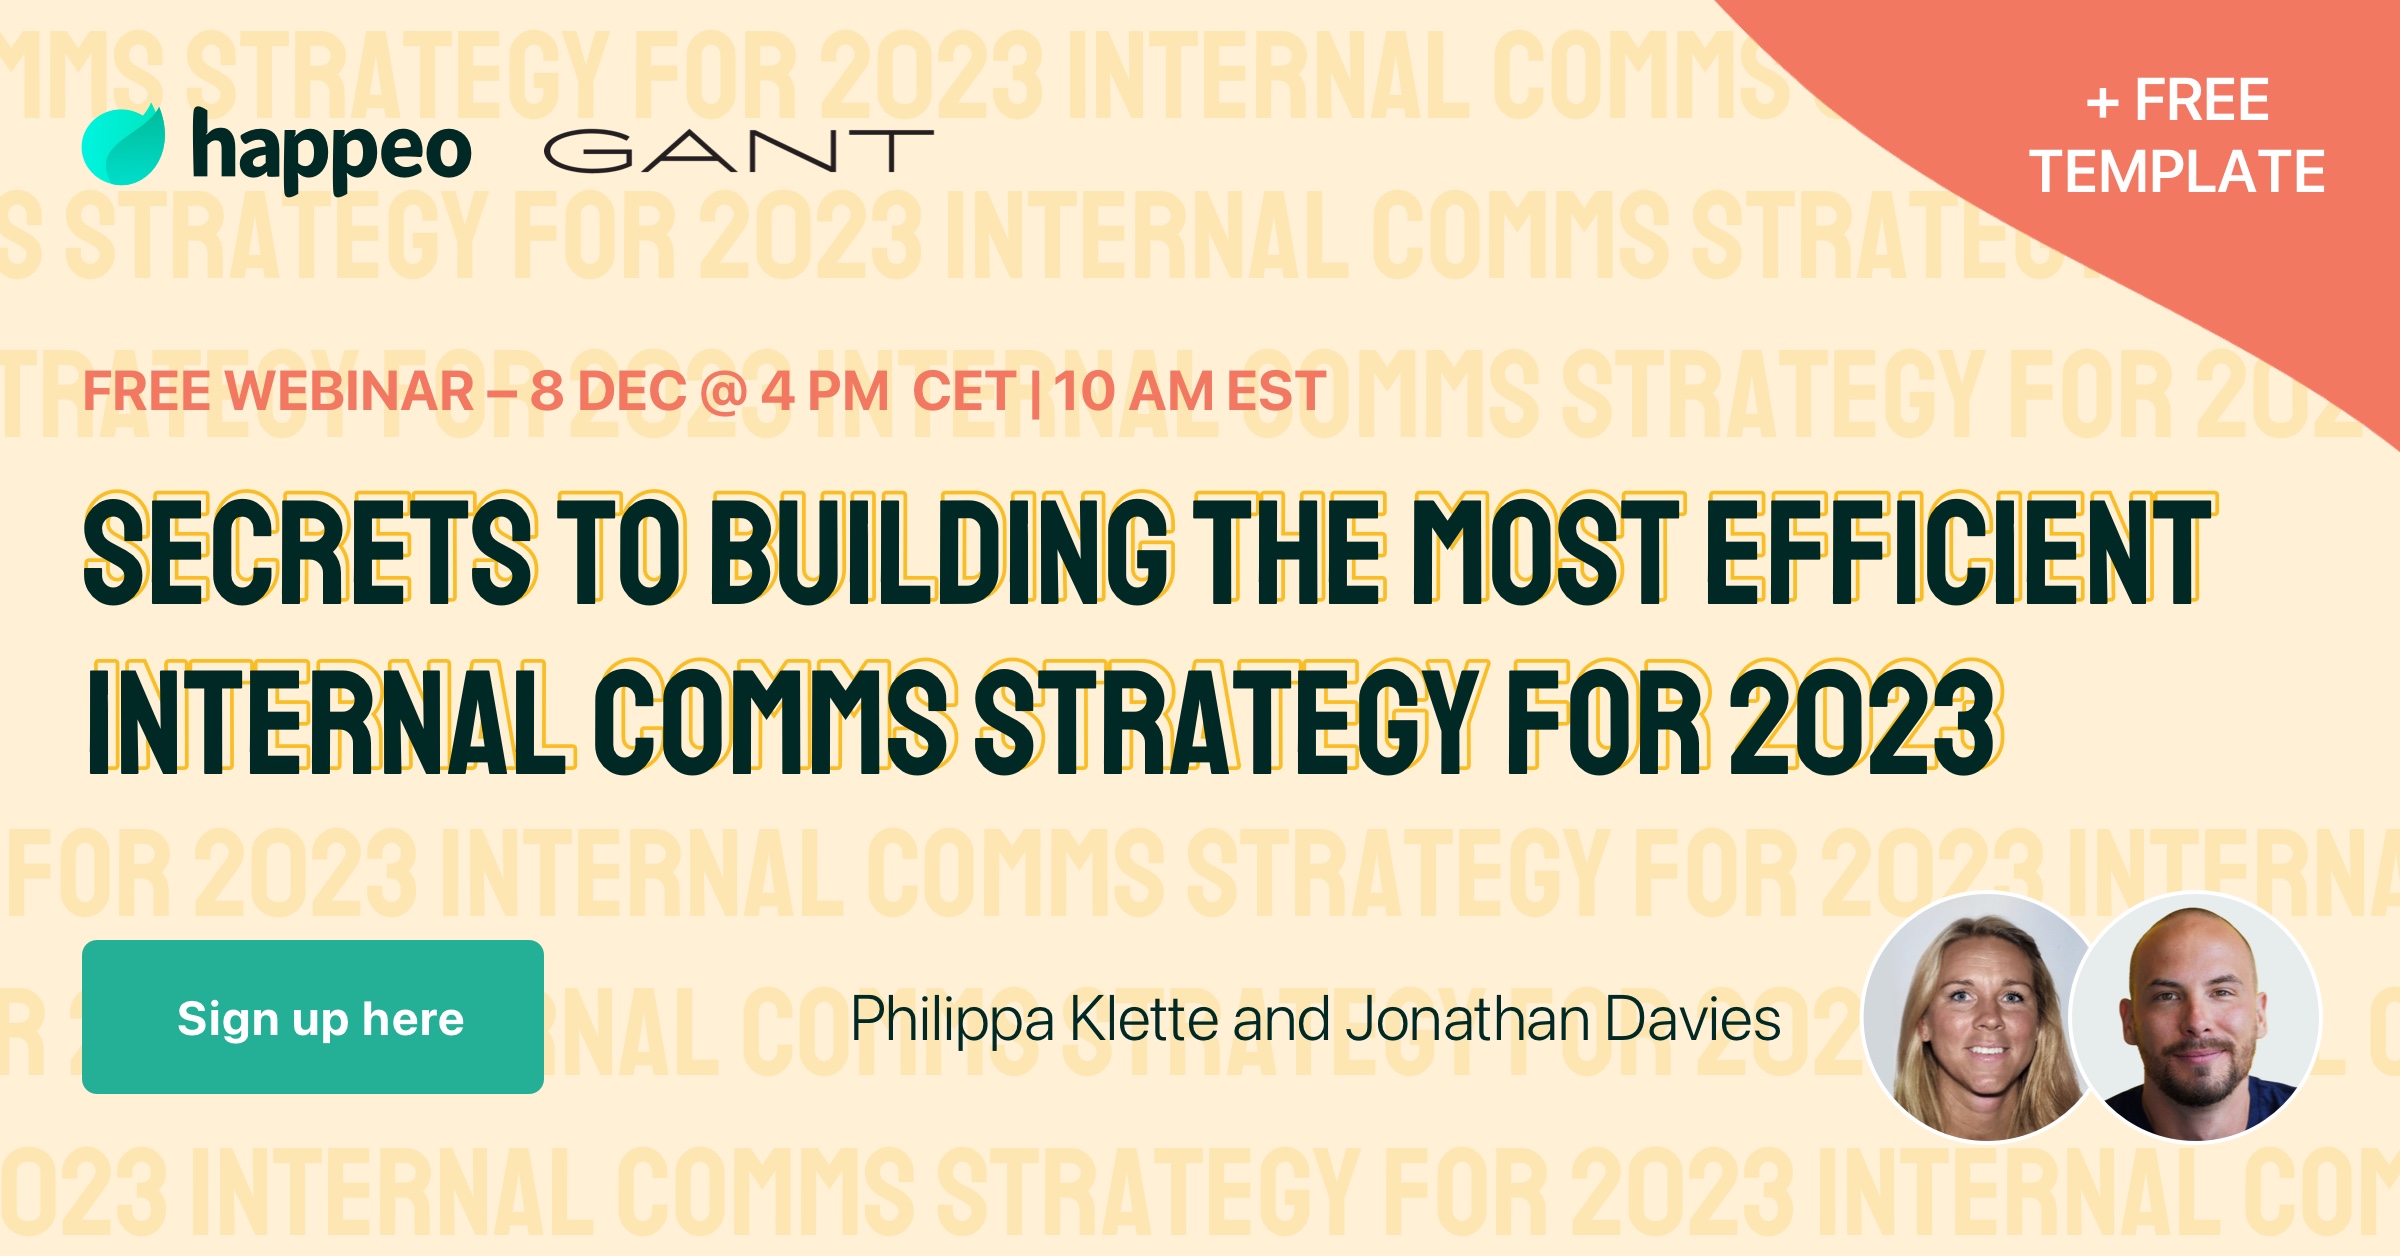 Secrets to building the most efficient Internal Comms strategy for 2023